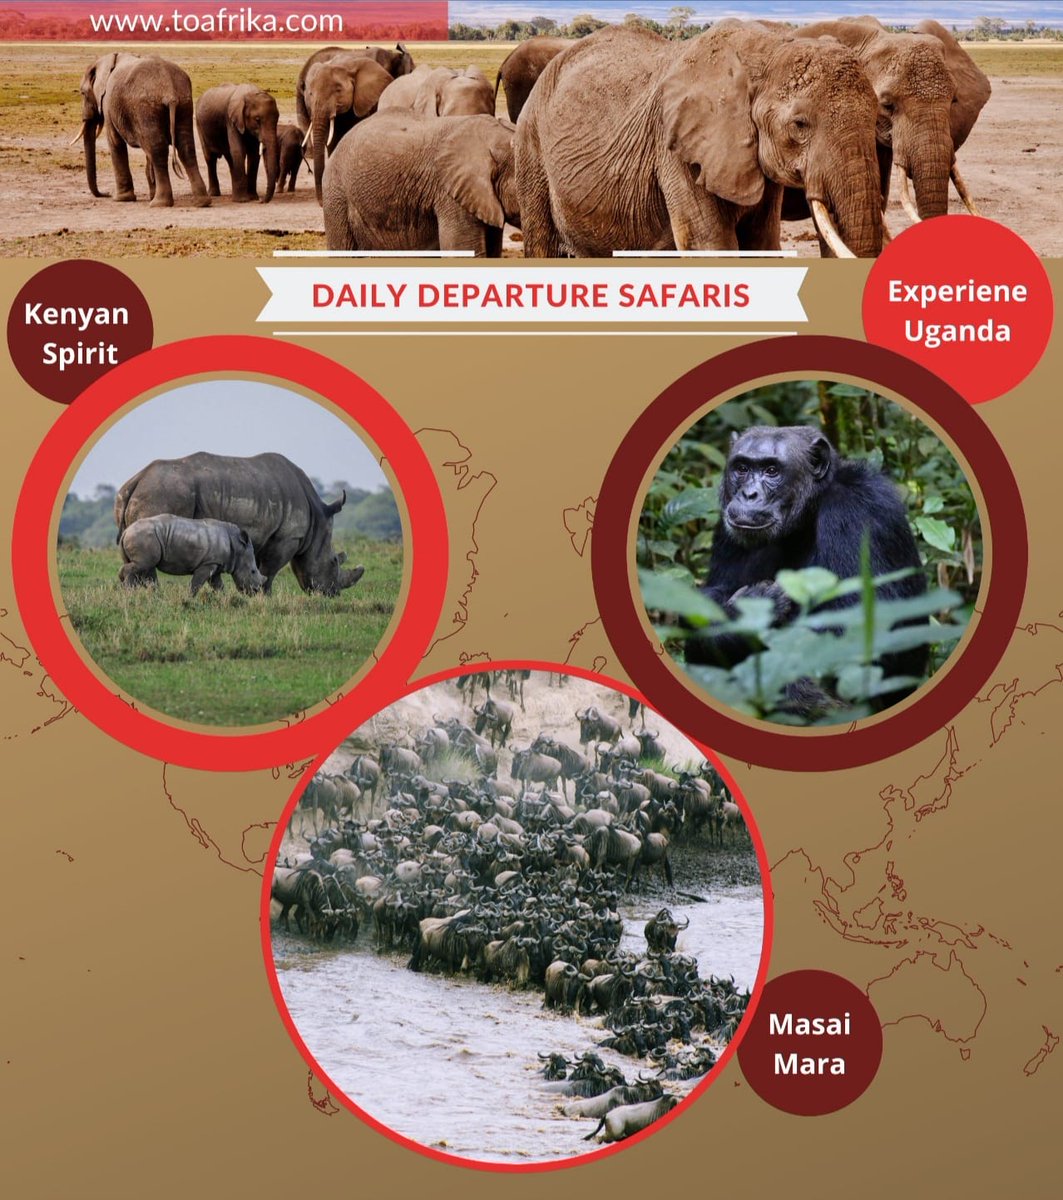 Embark on the ultimate African adventure with our daily departure safaris to Amboseli, Maasai Mara, and Uganda! Witness breathtaking landscapes, and encounter incredible wildlife.

For bookings: 
📲+254 – 748 717 387
📧info@toafrika.com

#Safari #Amboseli #MaasaiMara #Uganda